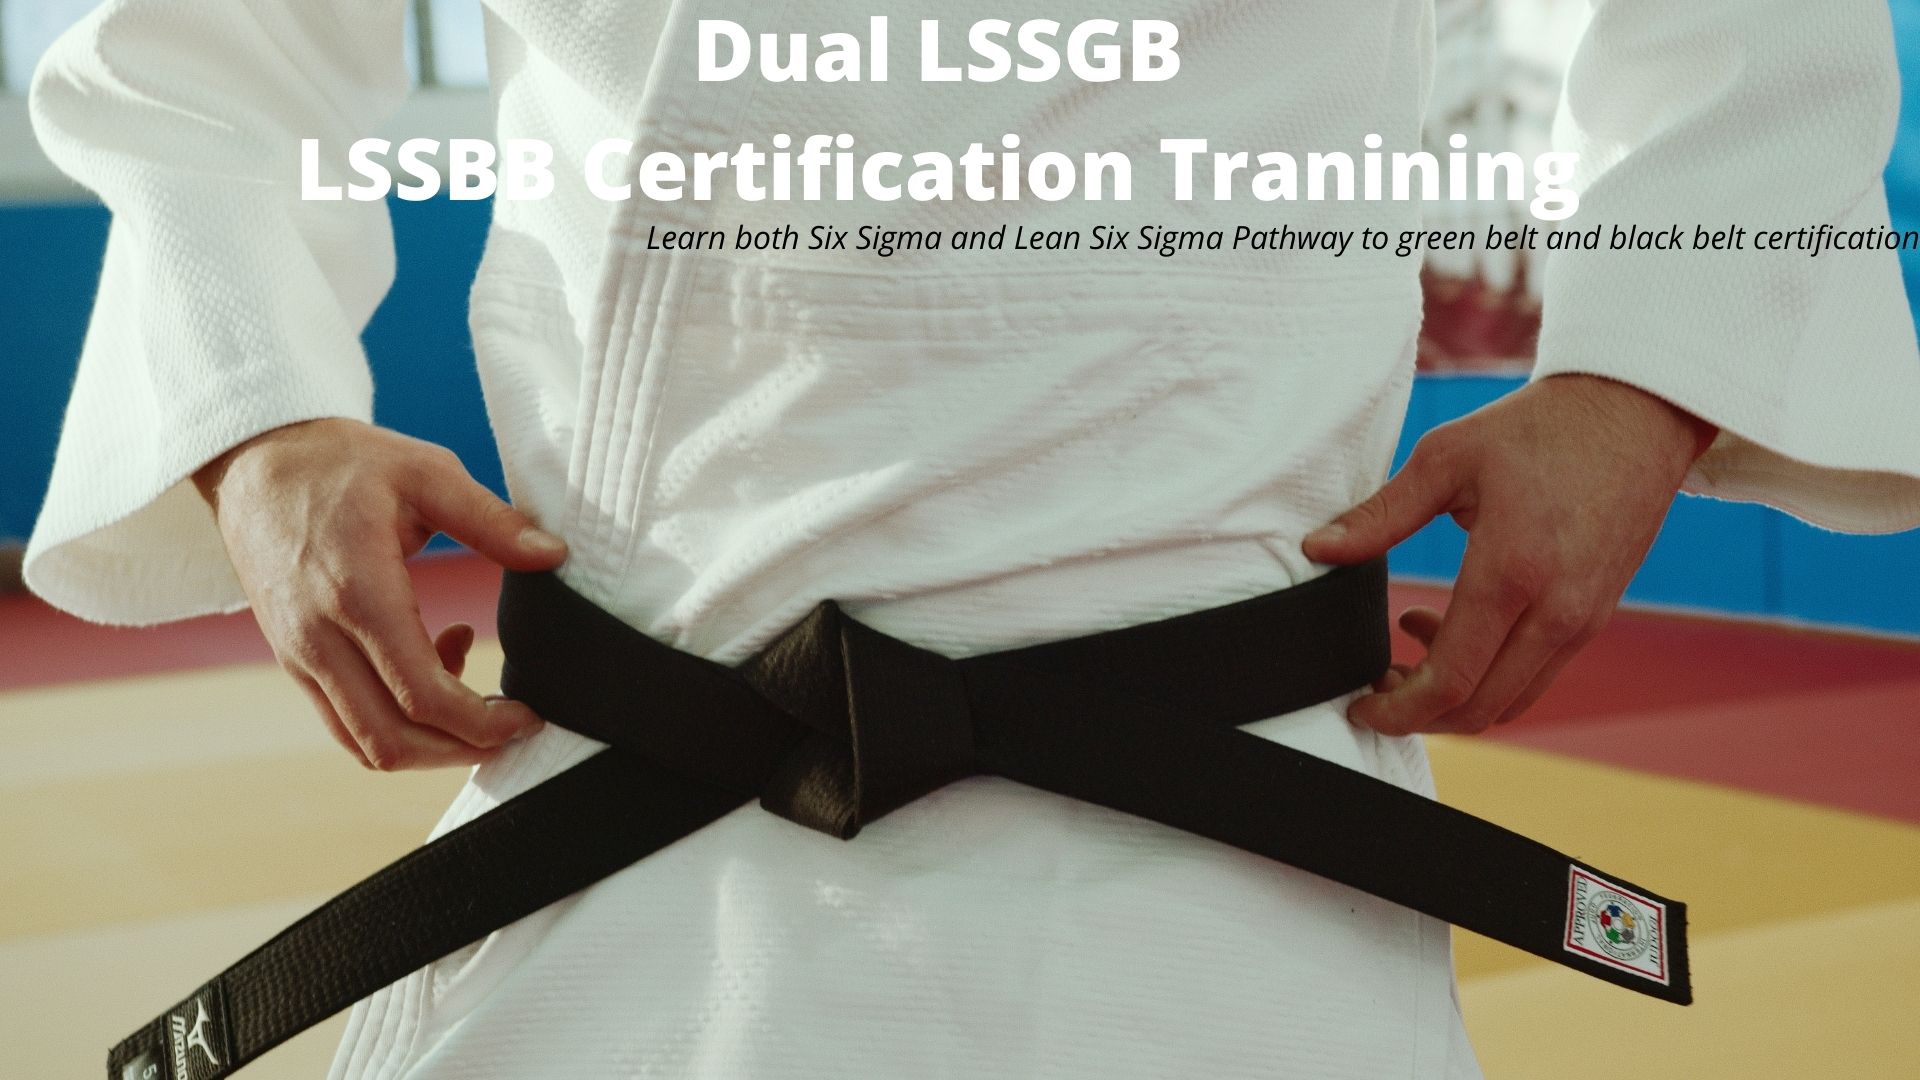 Dual LSSGB and LSSBB training Previous Next Dual LSSGB and LSSBB Training